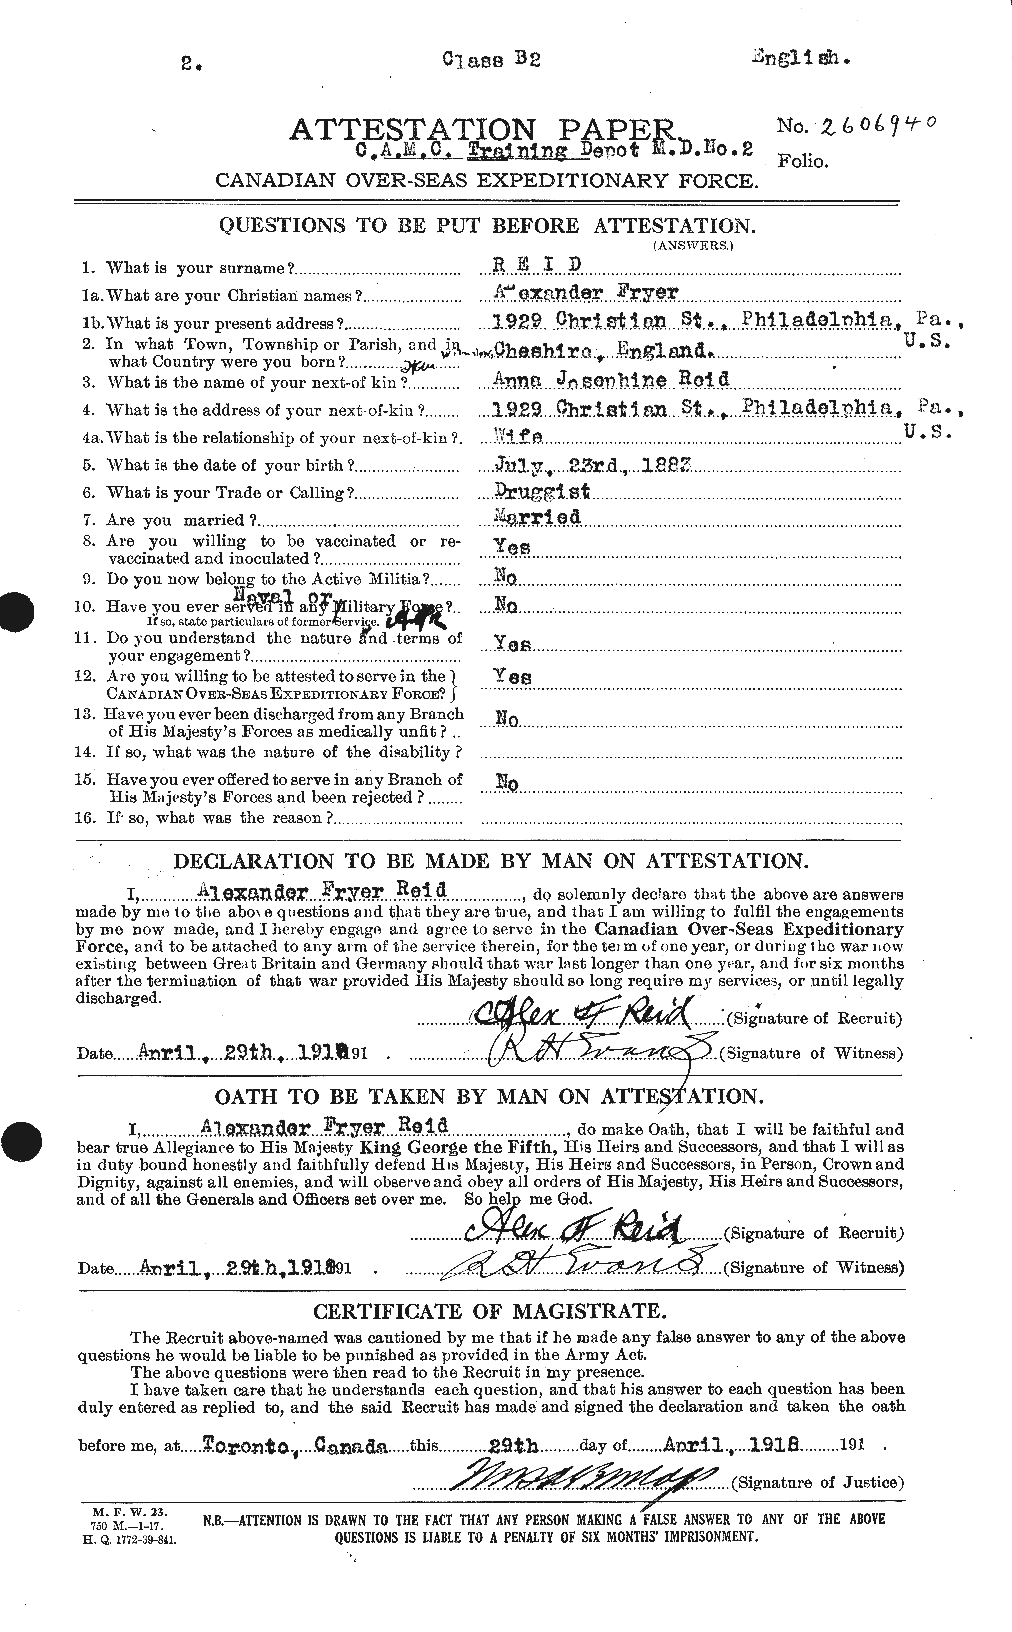 Personnel Records of the First World War - CEF 597779a